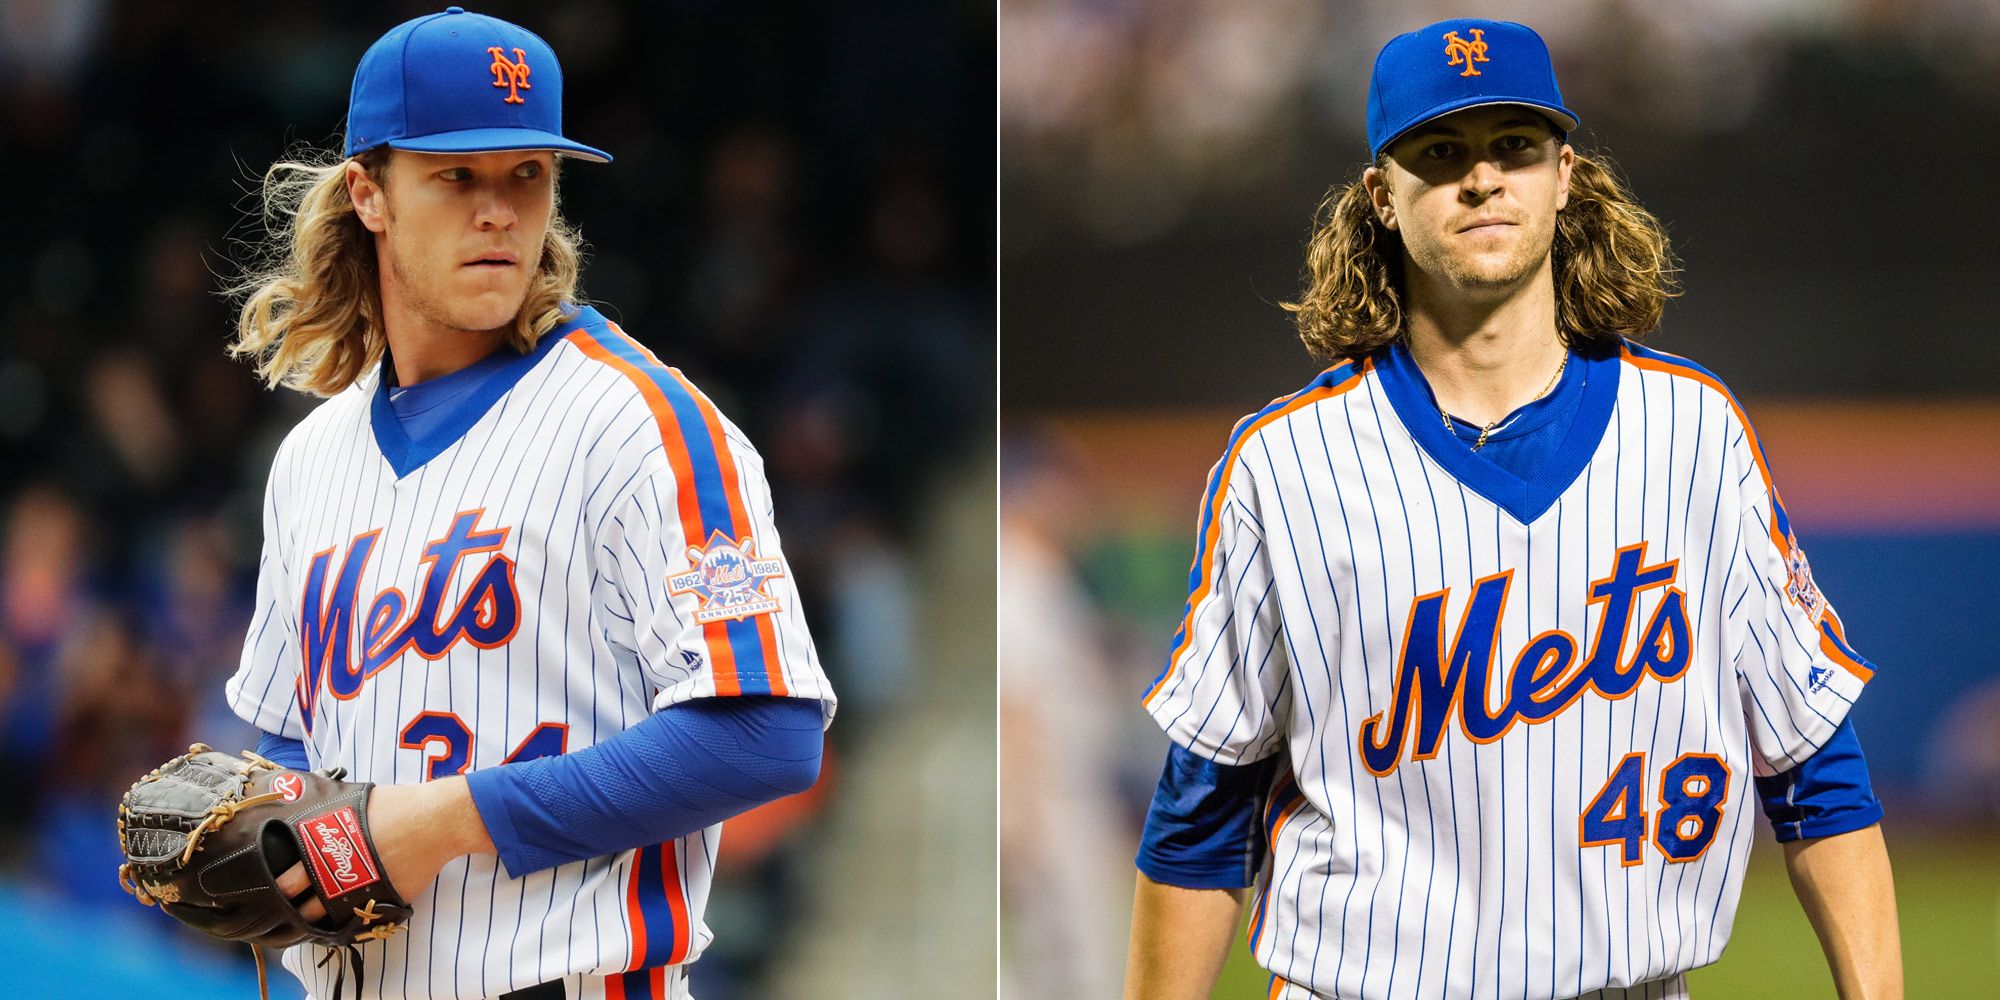 Who Is Jacob deGrom Married To?